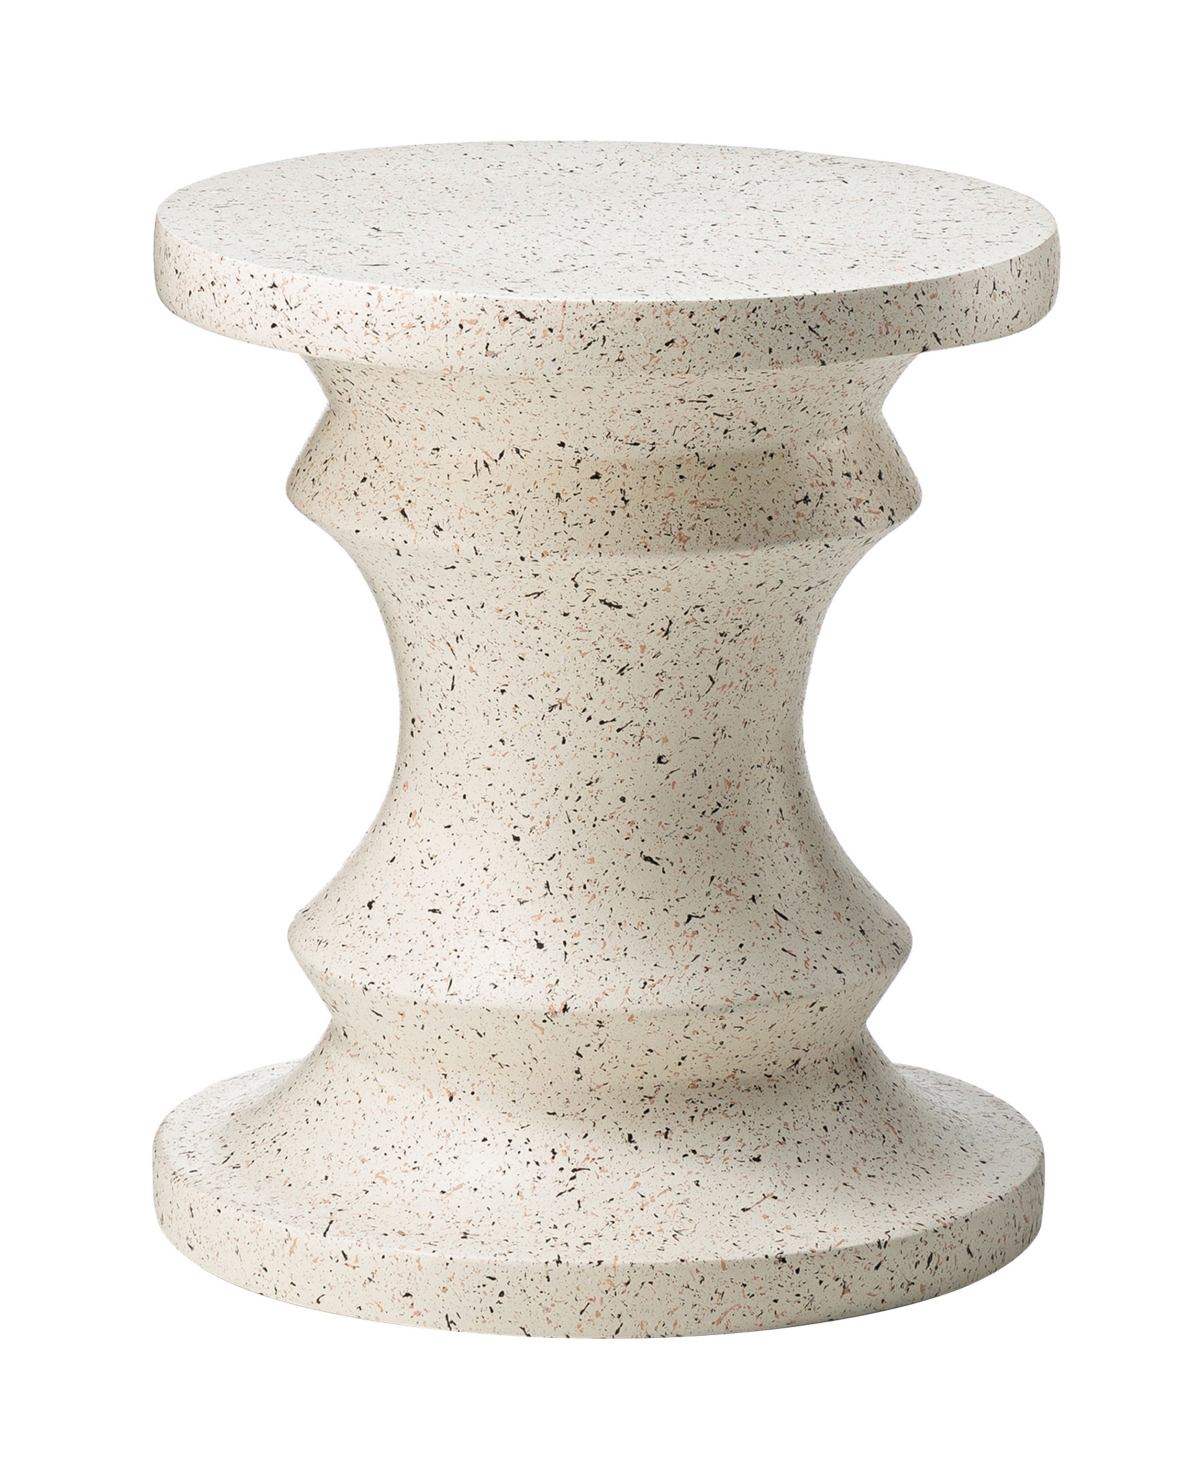 Multi-functional Faux Terrazzo Chess Garden Stool or Planter Stand or Accent Table - White